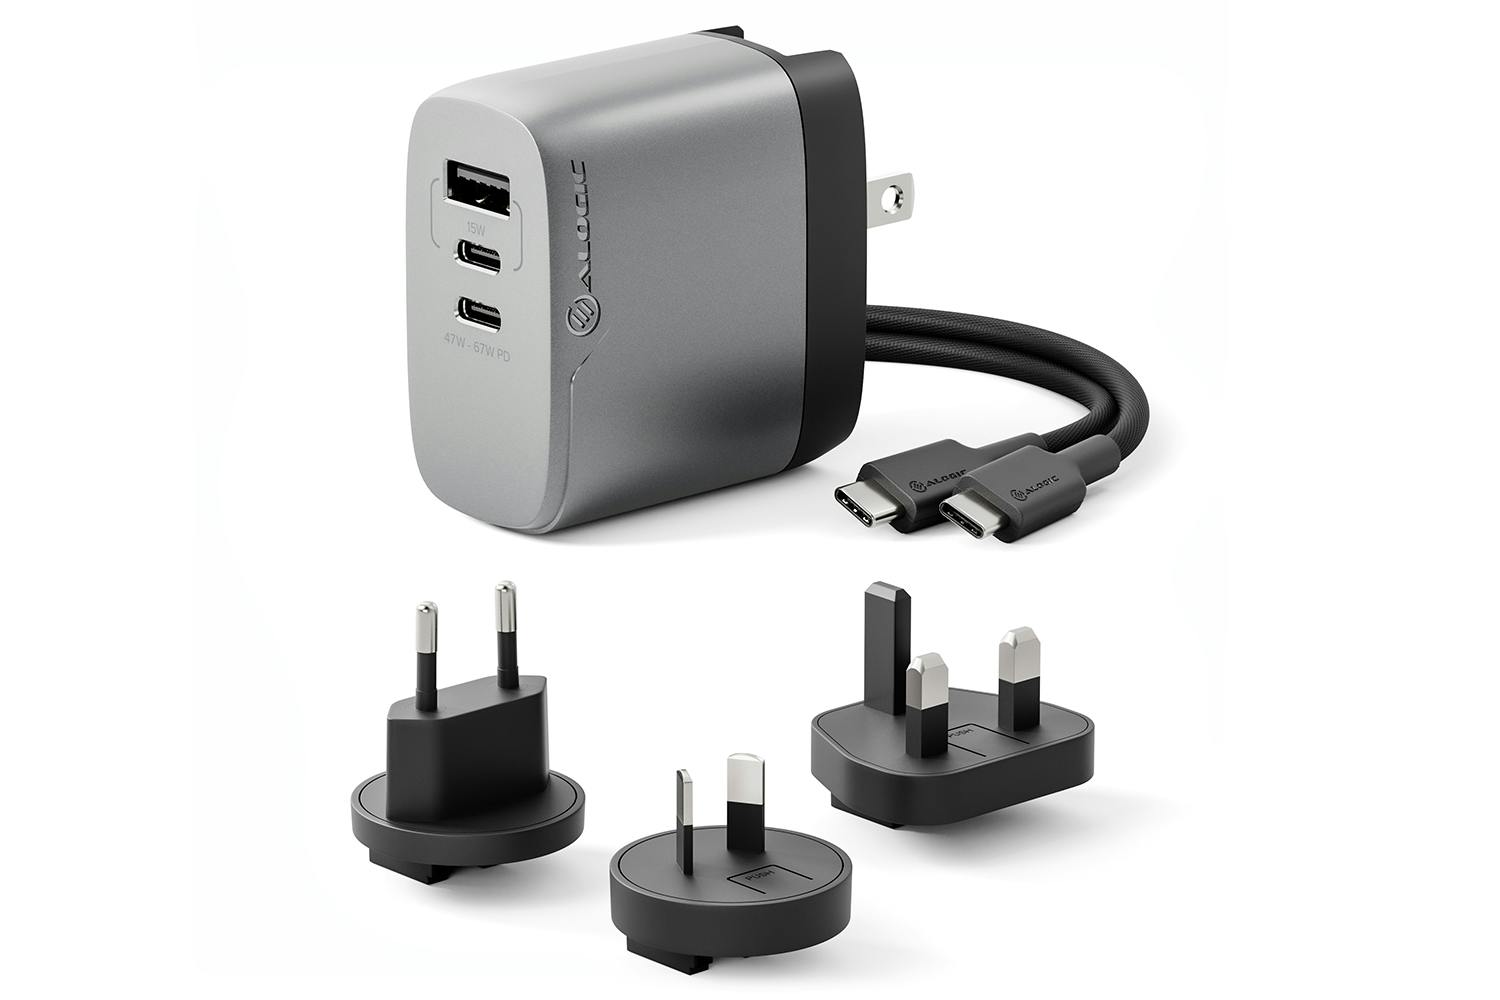 Alogic 67W Rapid Power Multi-Country Travel Gan Charger